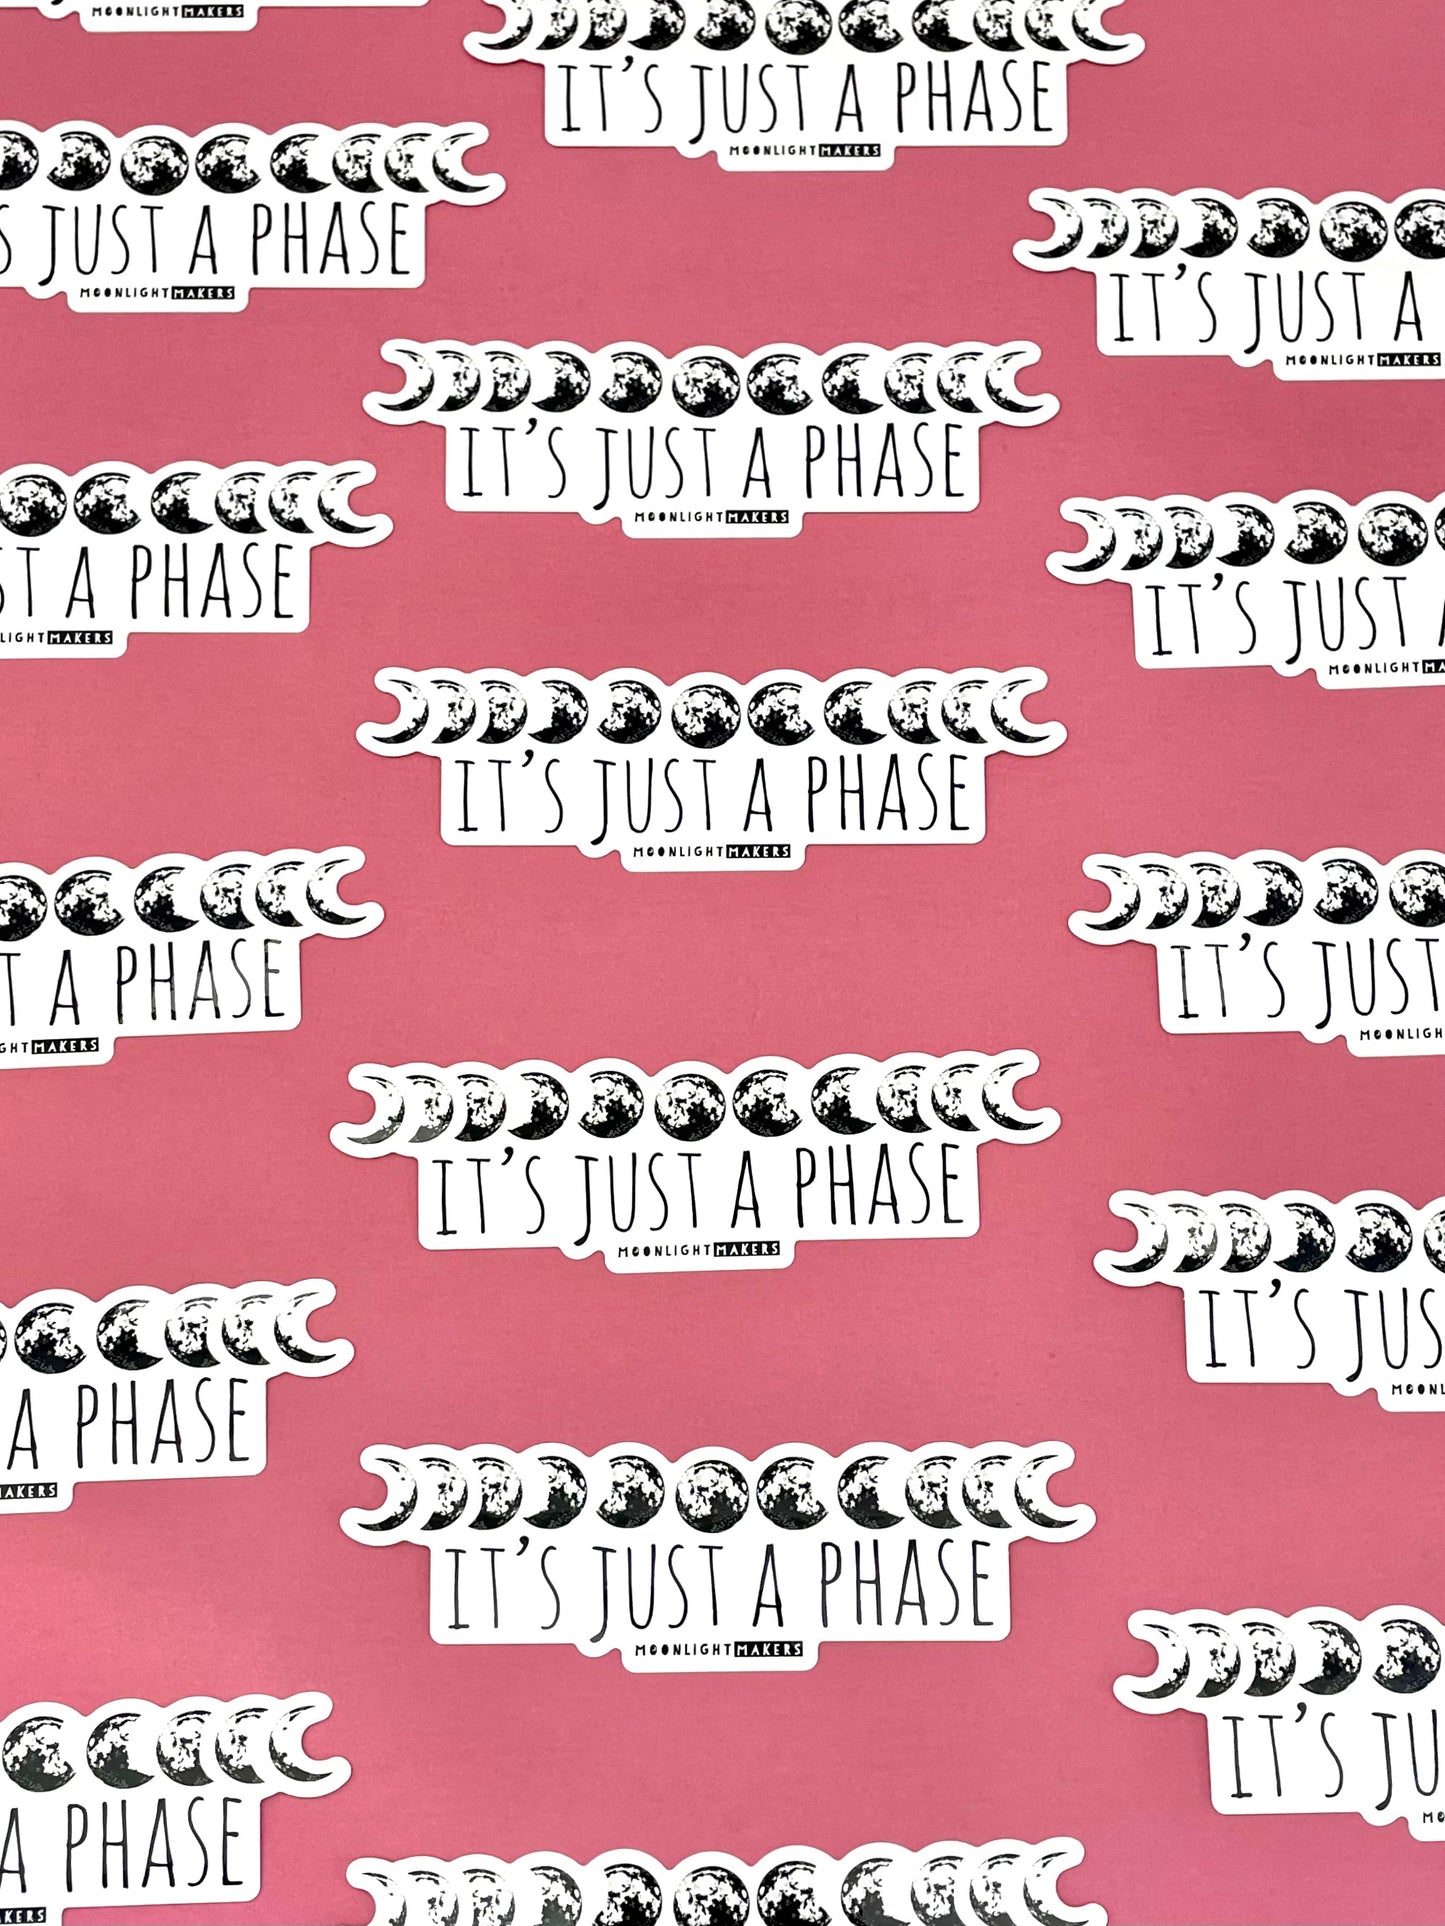 It's Just a Phase - Die Cut Sticker - MoonlightMakers